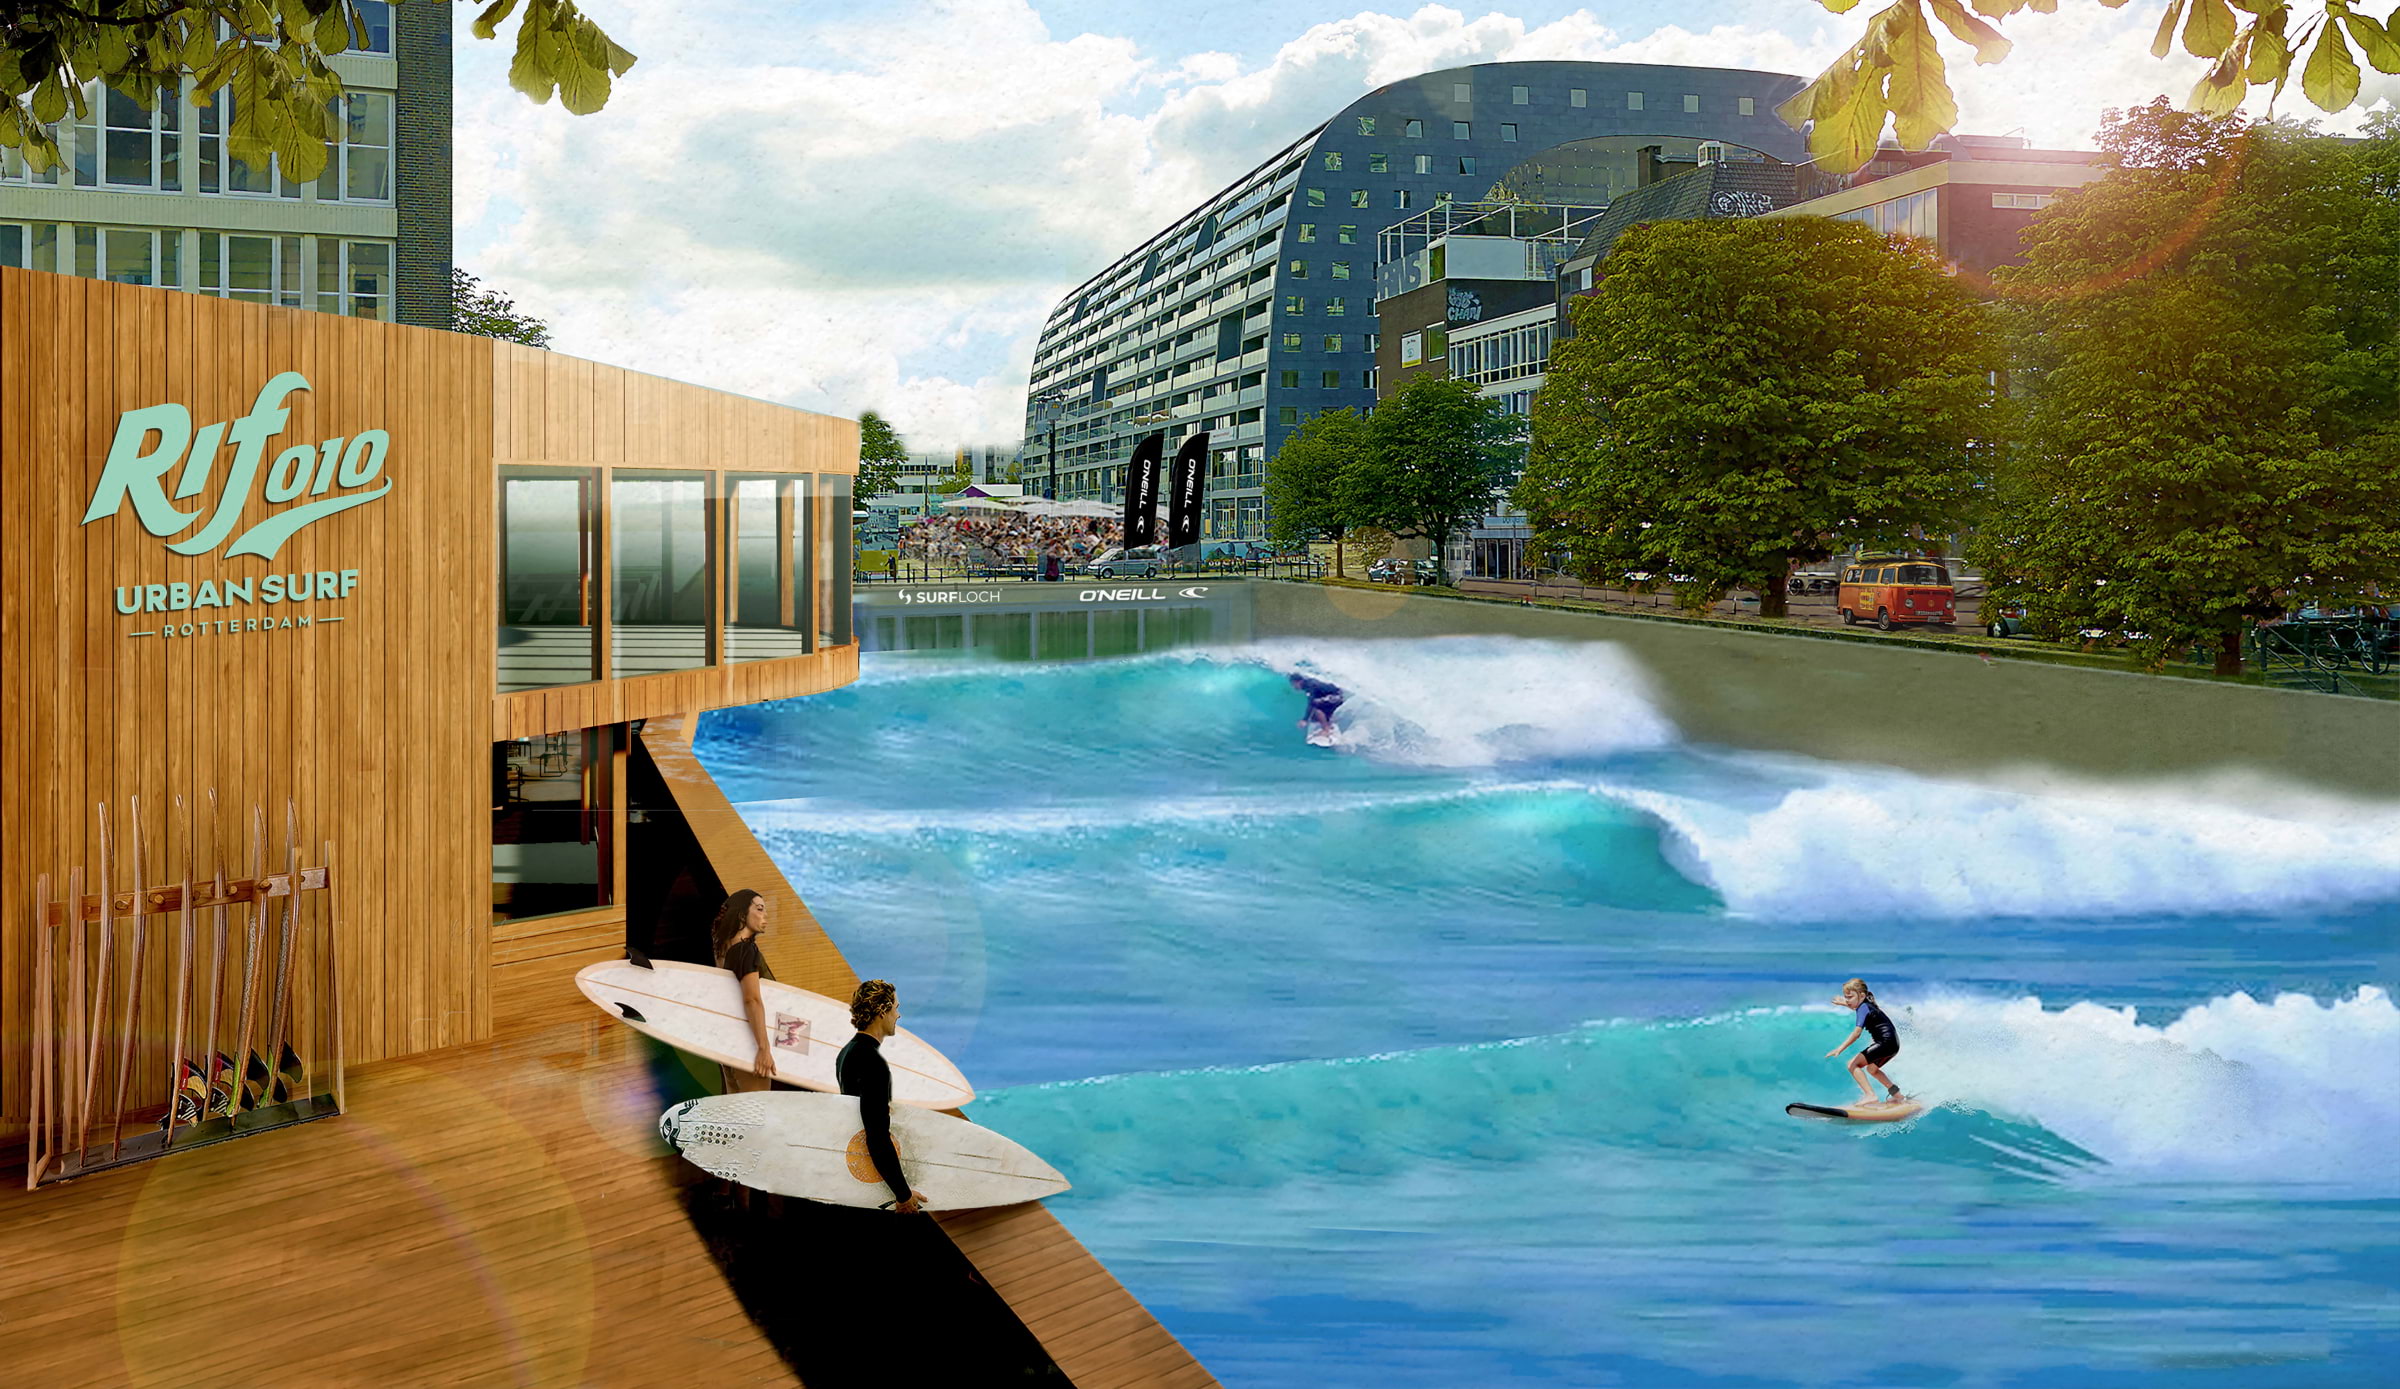 Soon you'll be able to hop on the Eurostar to the world's first city centre wave pool